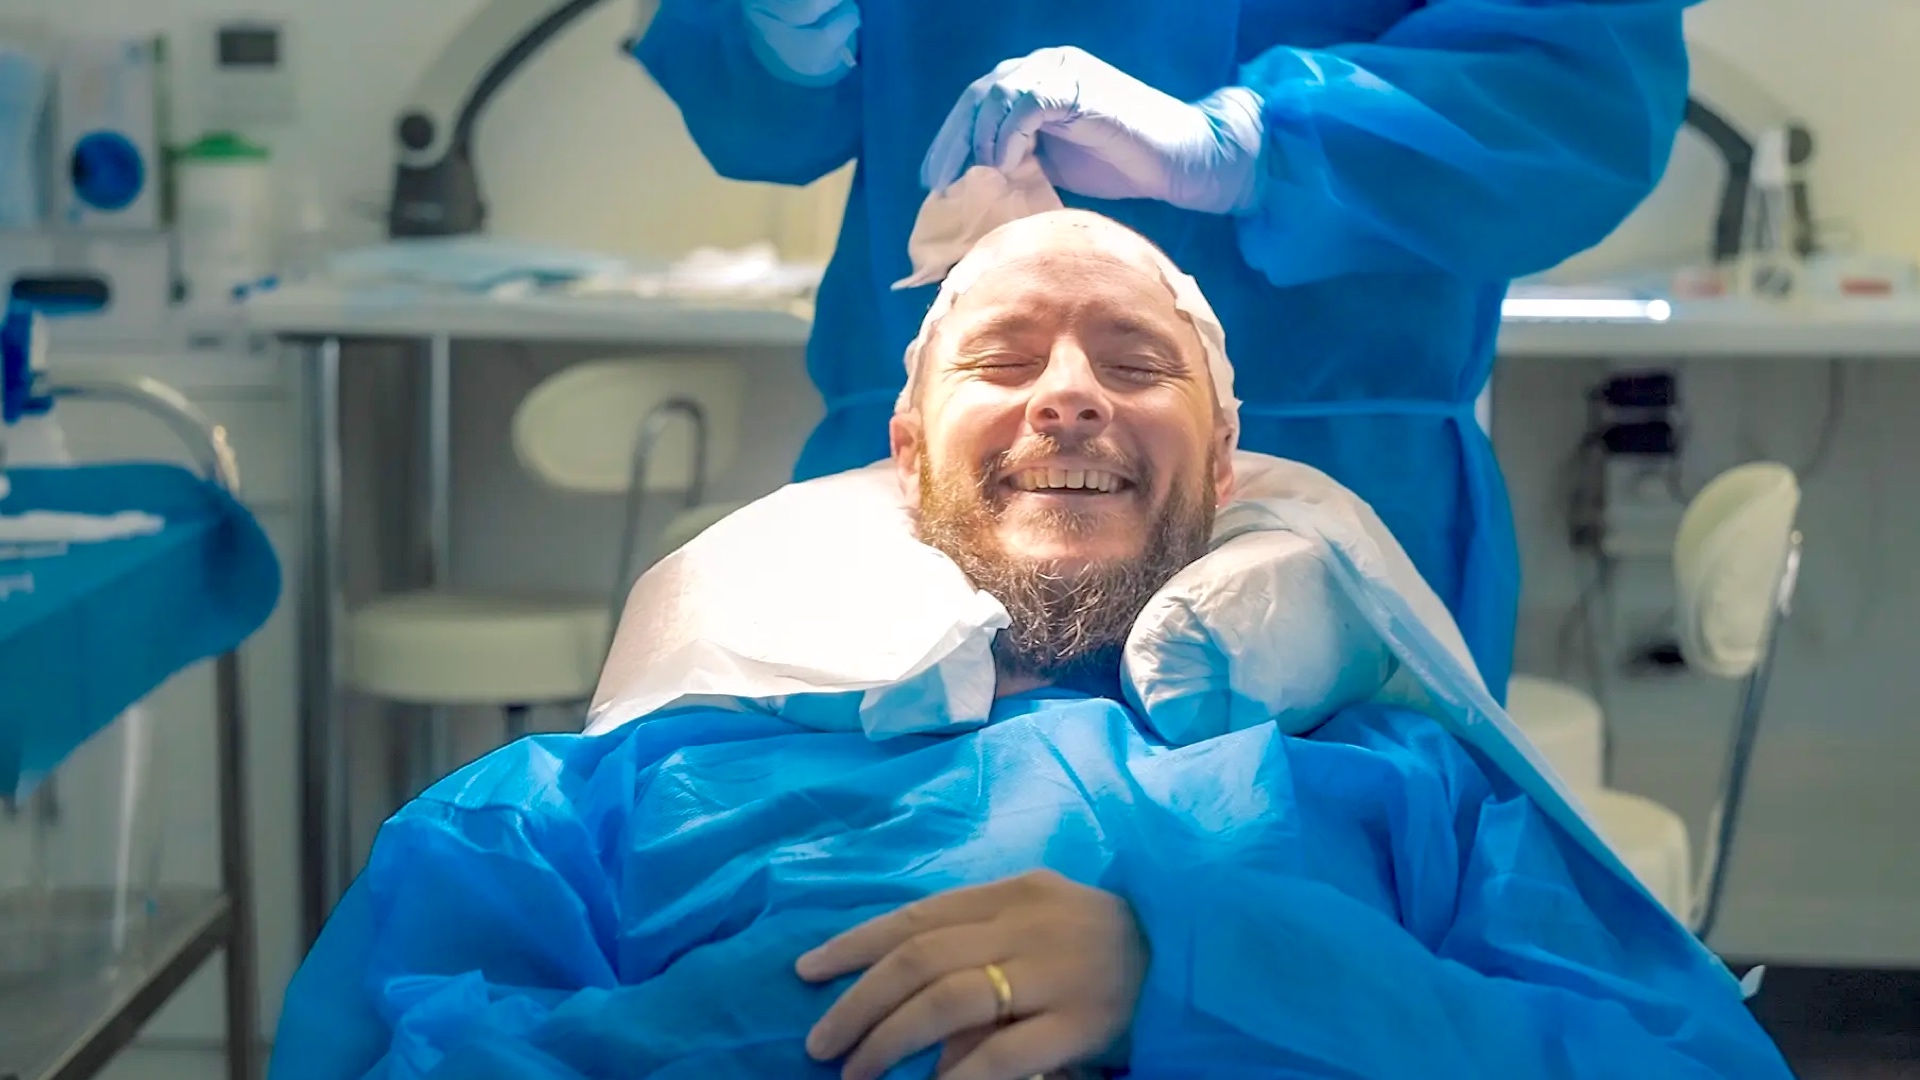 A smiling man with a beard, wearing a surgical cap and covered with a blue surgical drape, lies in an operating room with medical staff attending to him for a hair implant procedure.